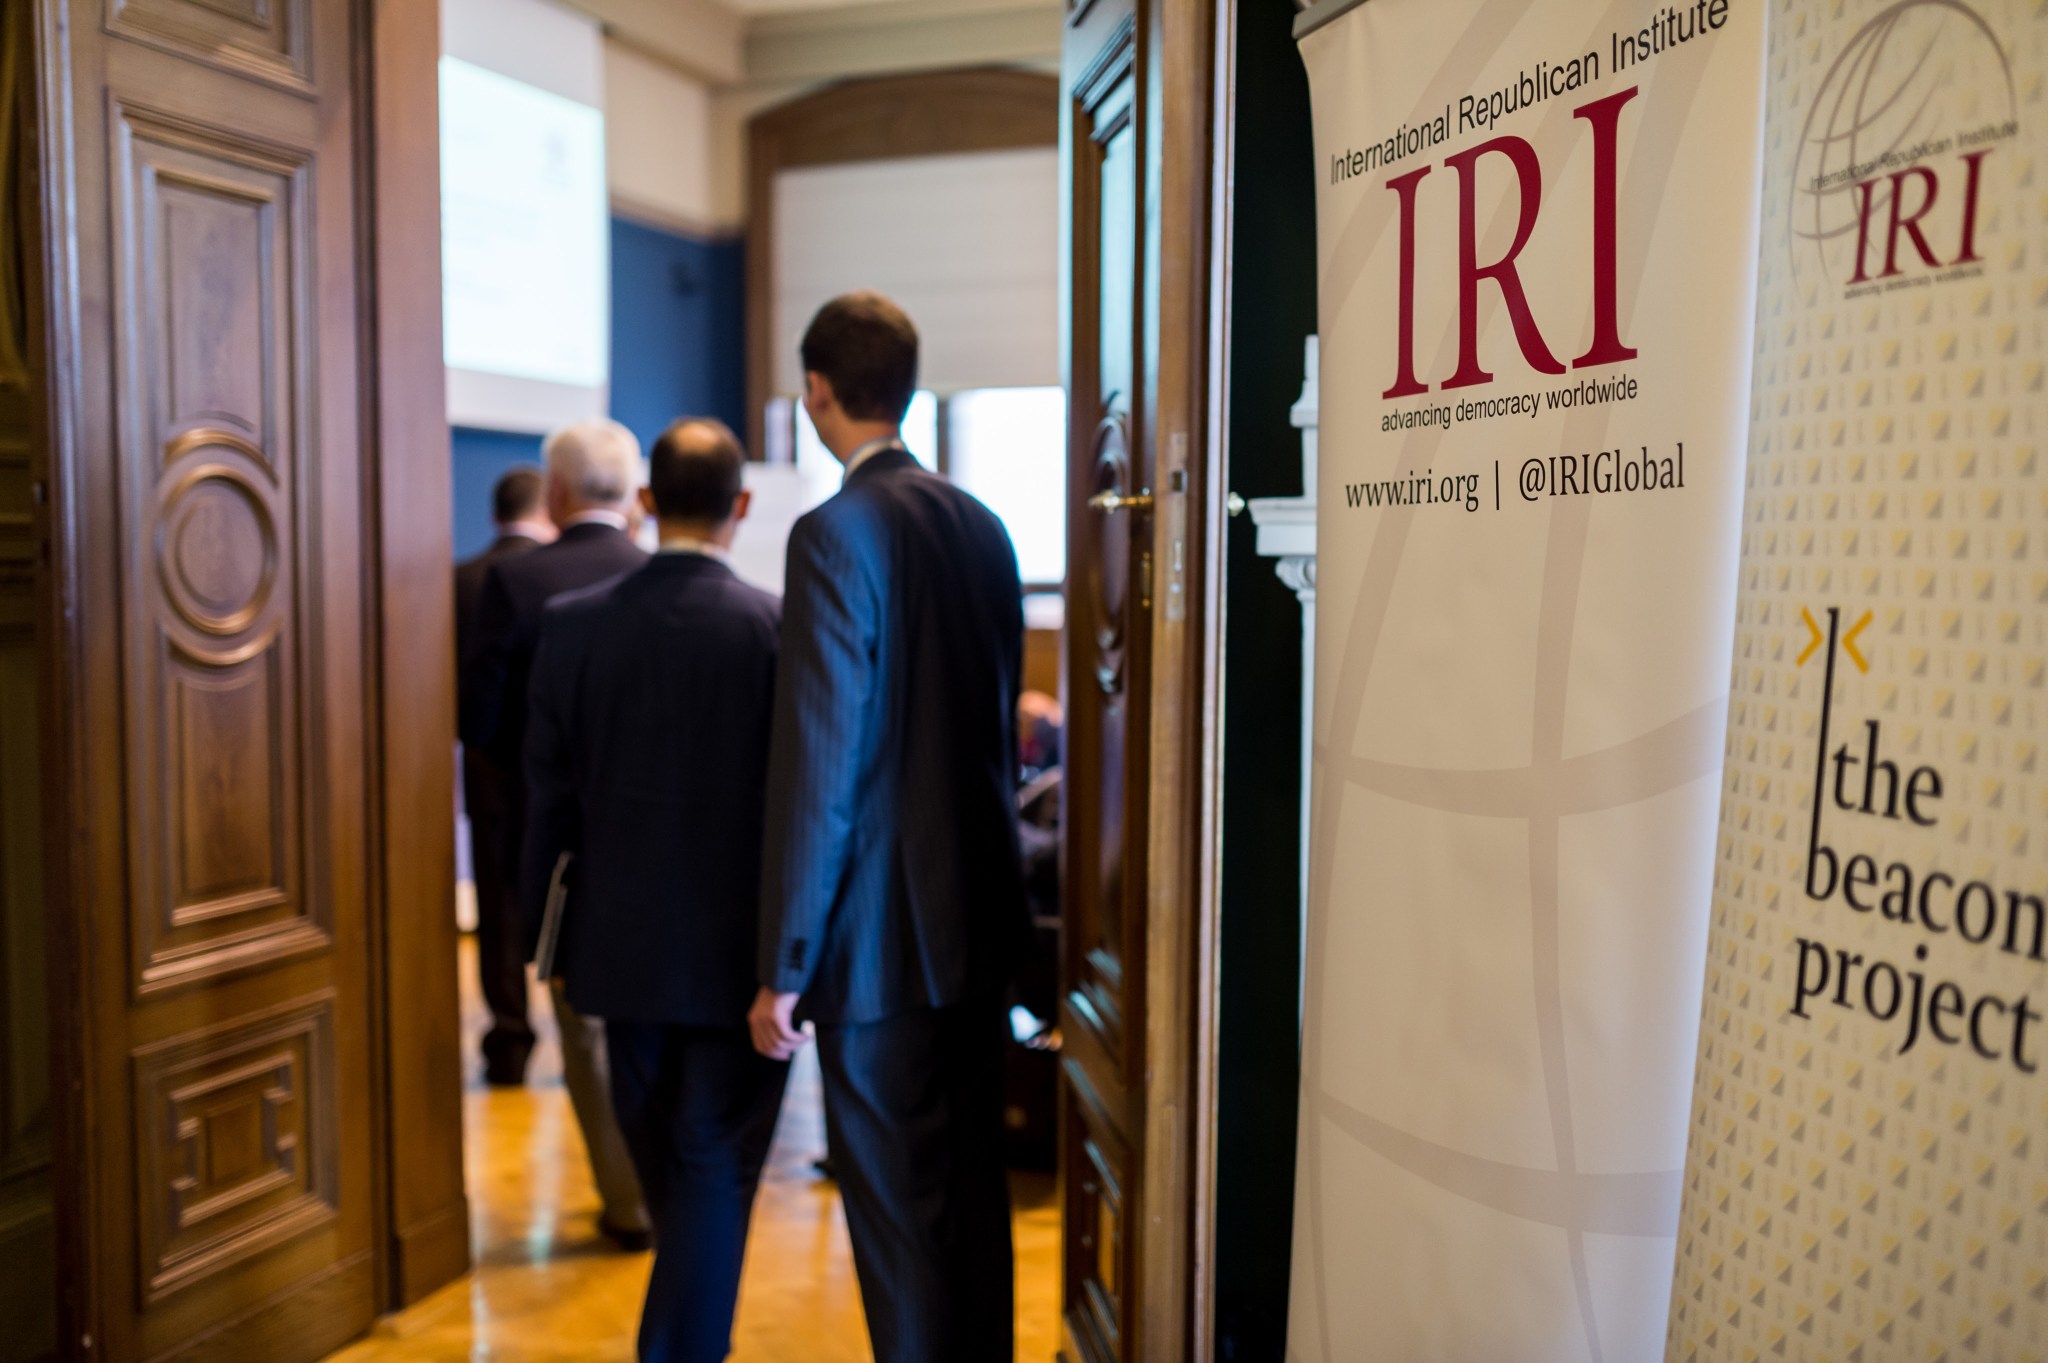 People Enter Room for IRI Meeting